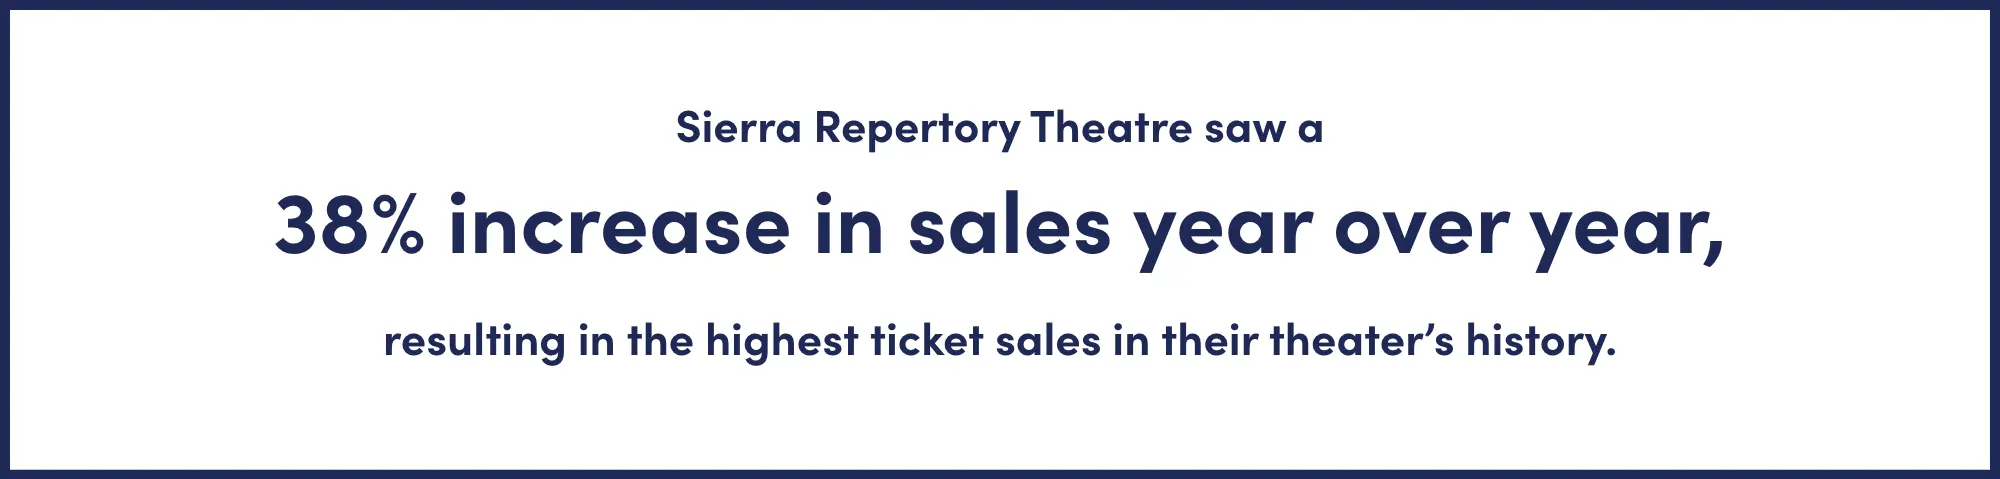 Sierra Repertory Theatre saw a 38% increase in sales year over year, resulting in the highest ticket sales in their theater’s history. 